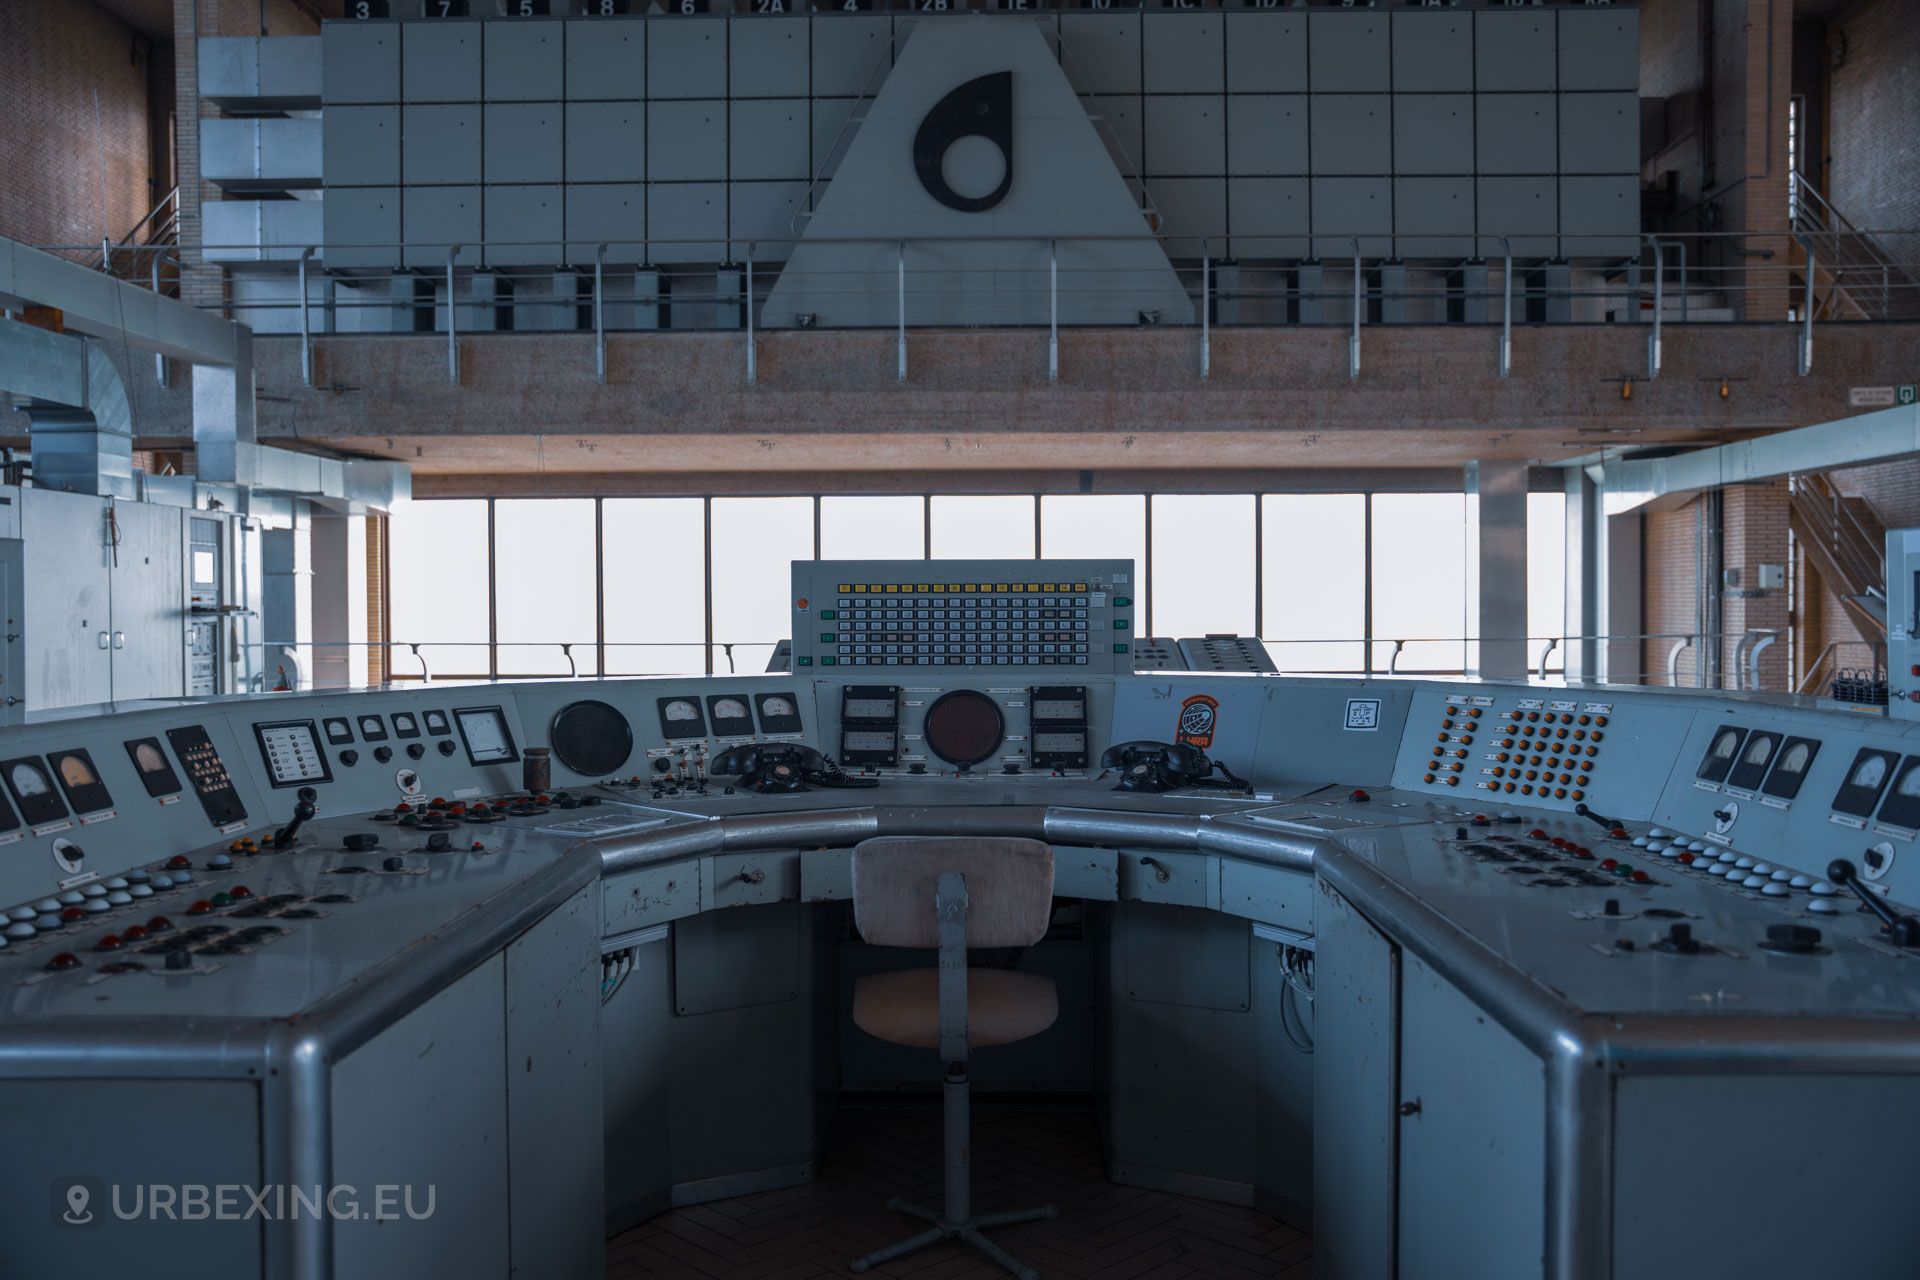 a photograph of the control panel inside a former transmitting facility used by the belgian radio